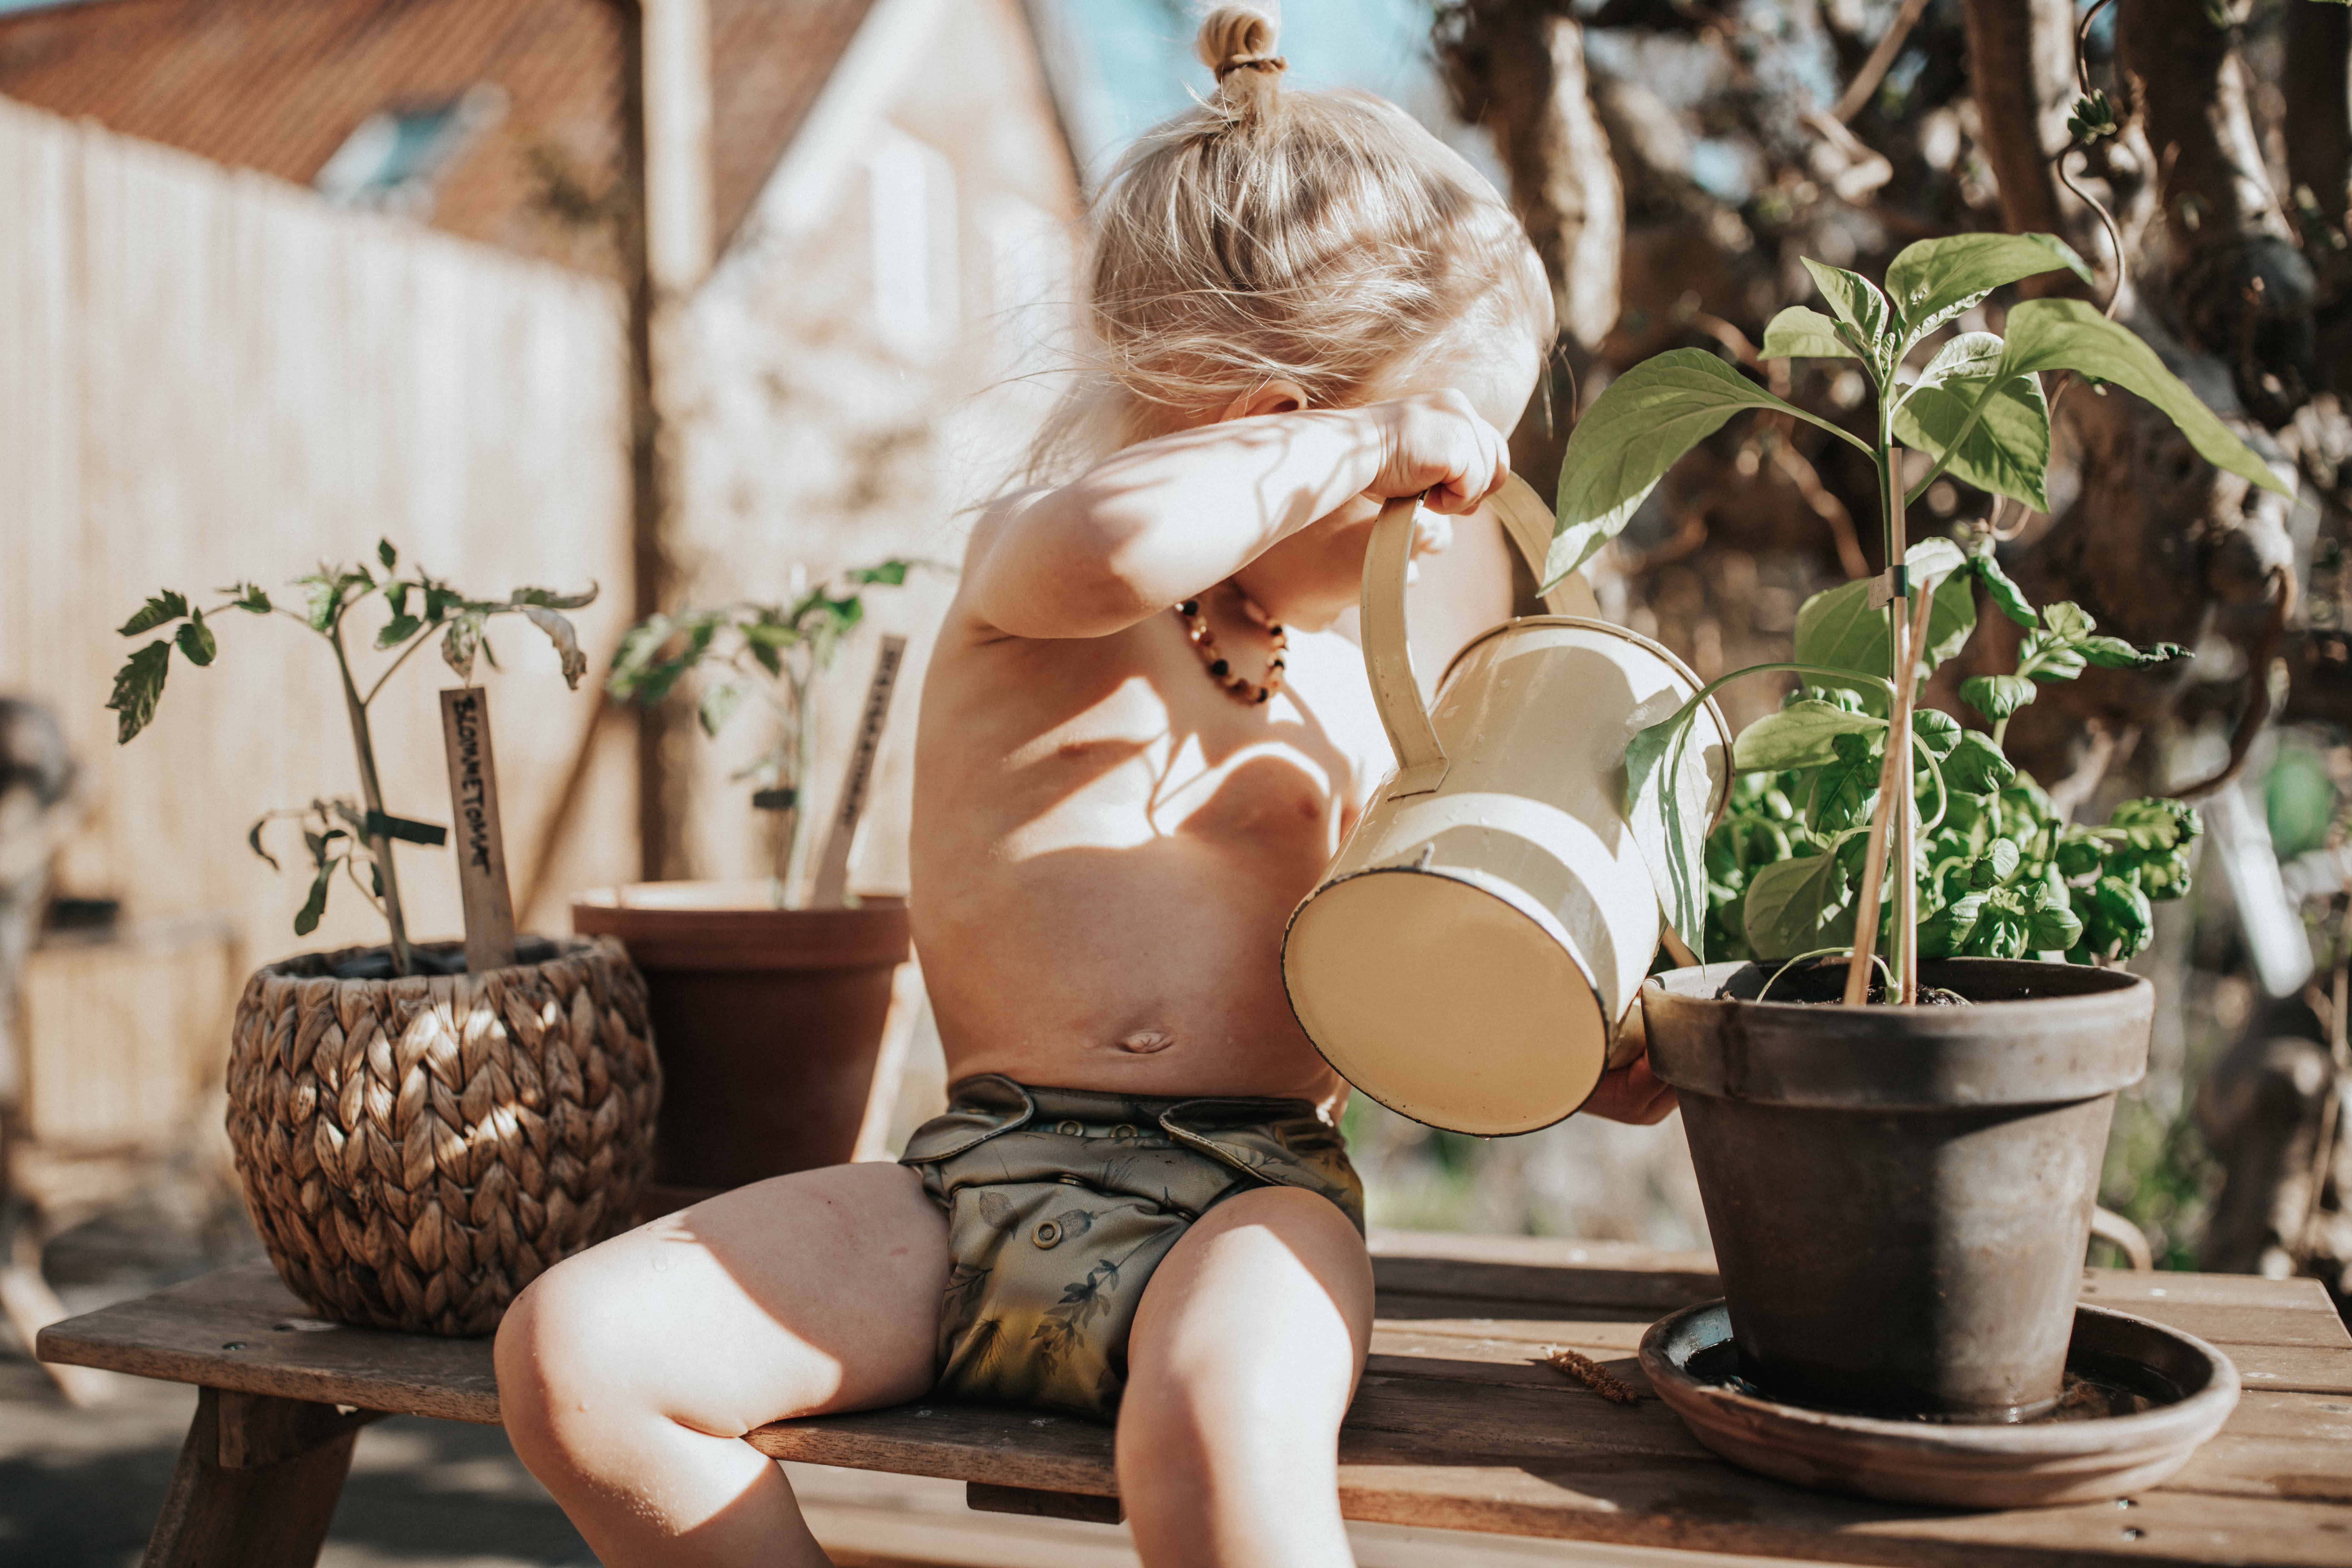 boy with cloth diaper watering plants